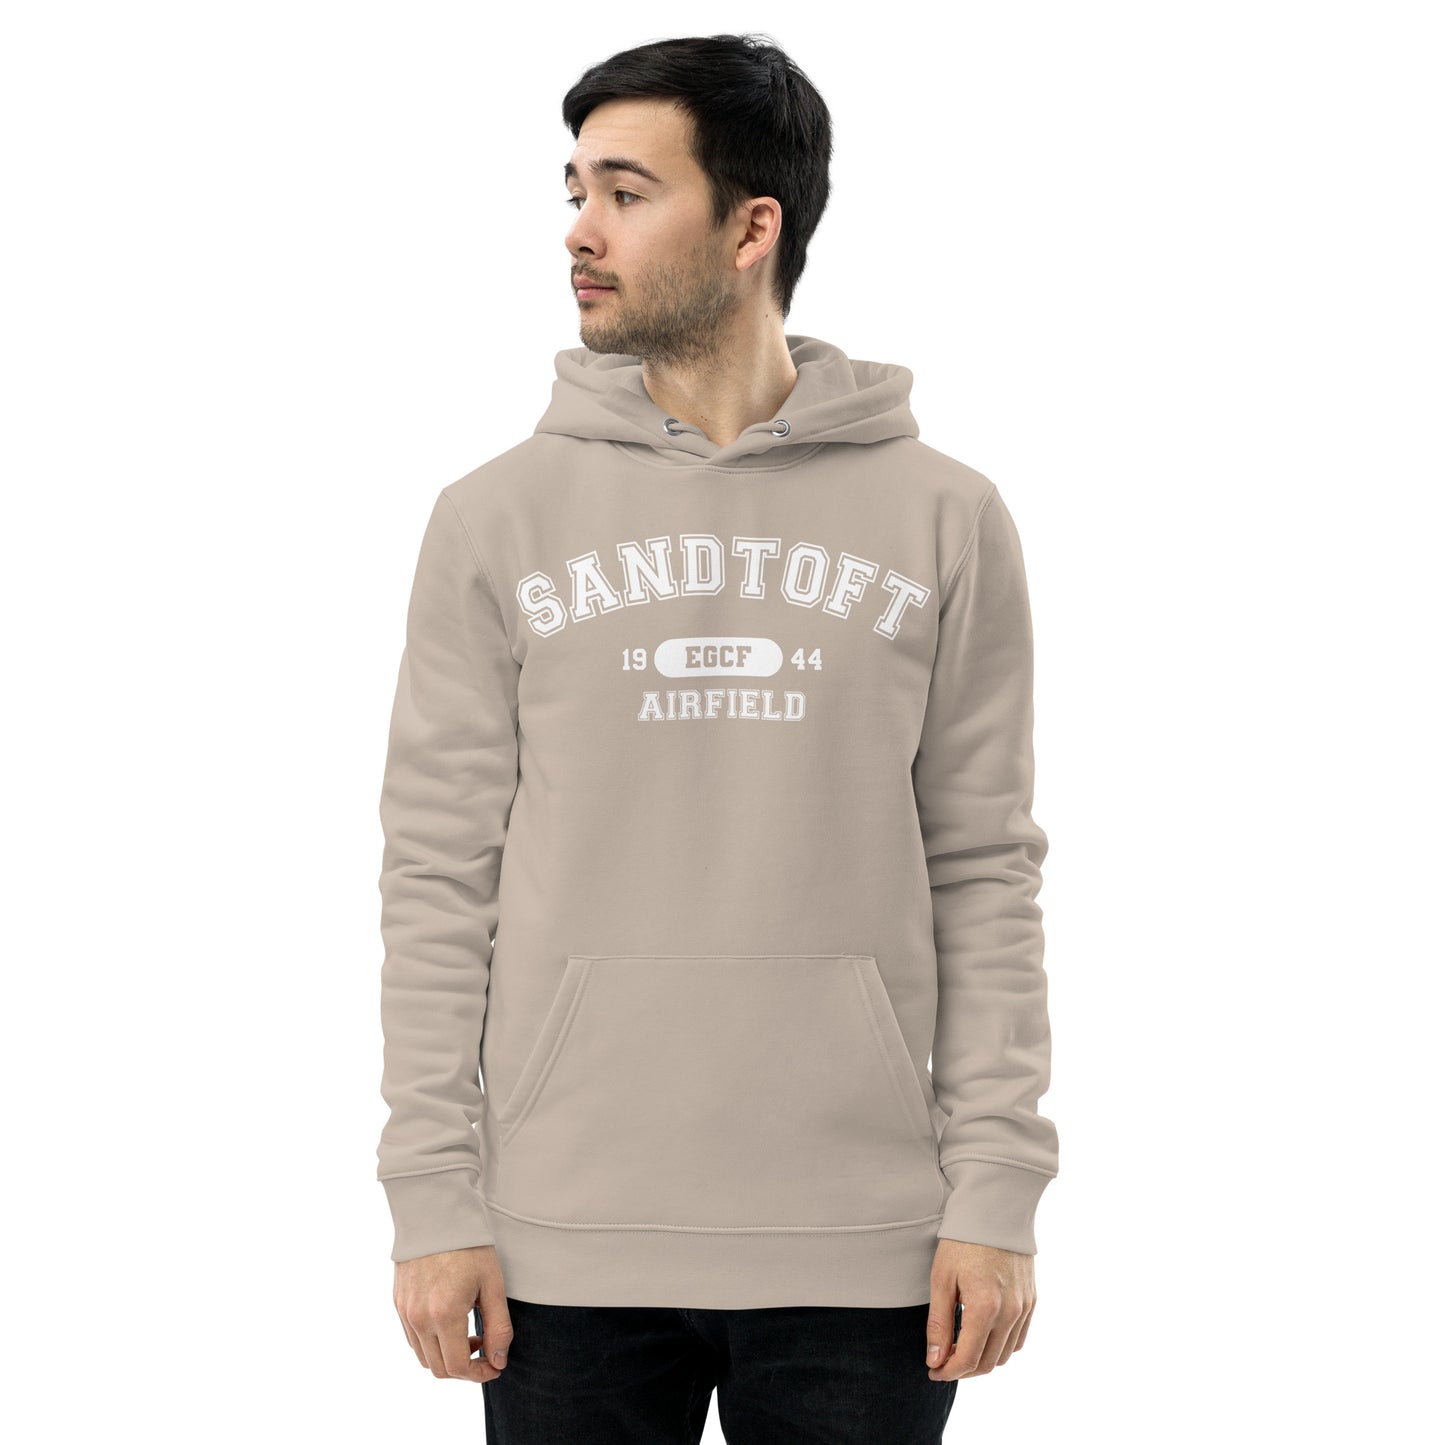 Sandtoft Airfield with ICAO code in collegiate style. Unisex essential eco hoodie.